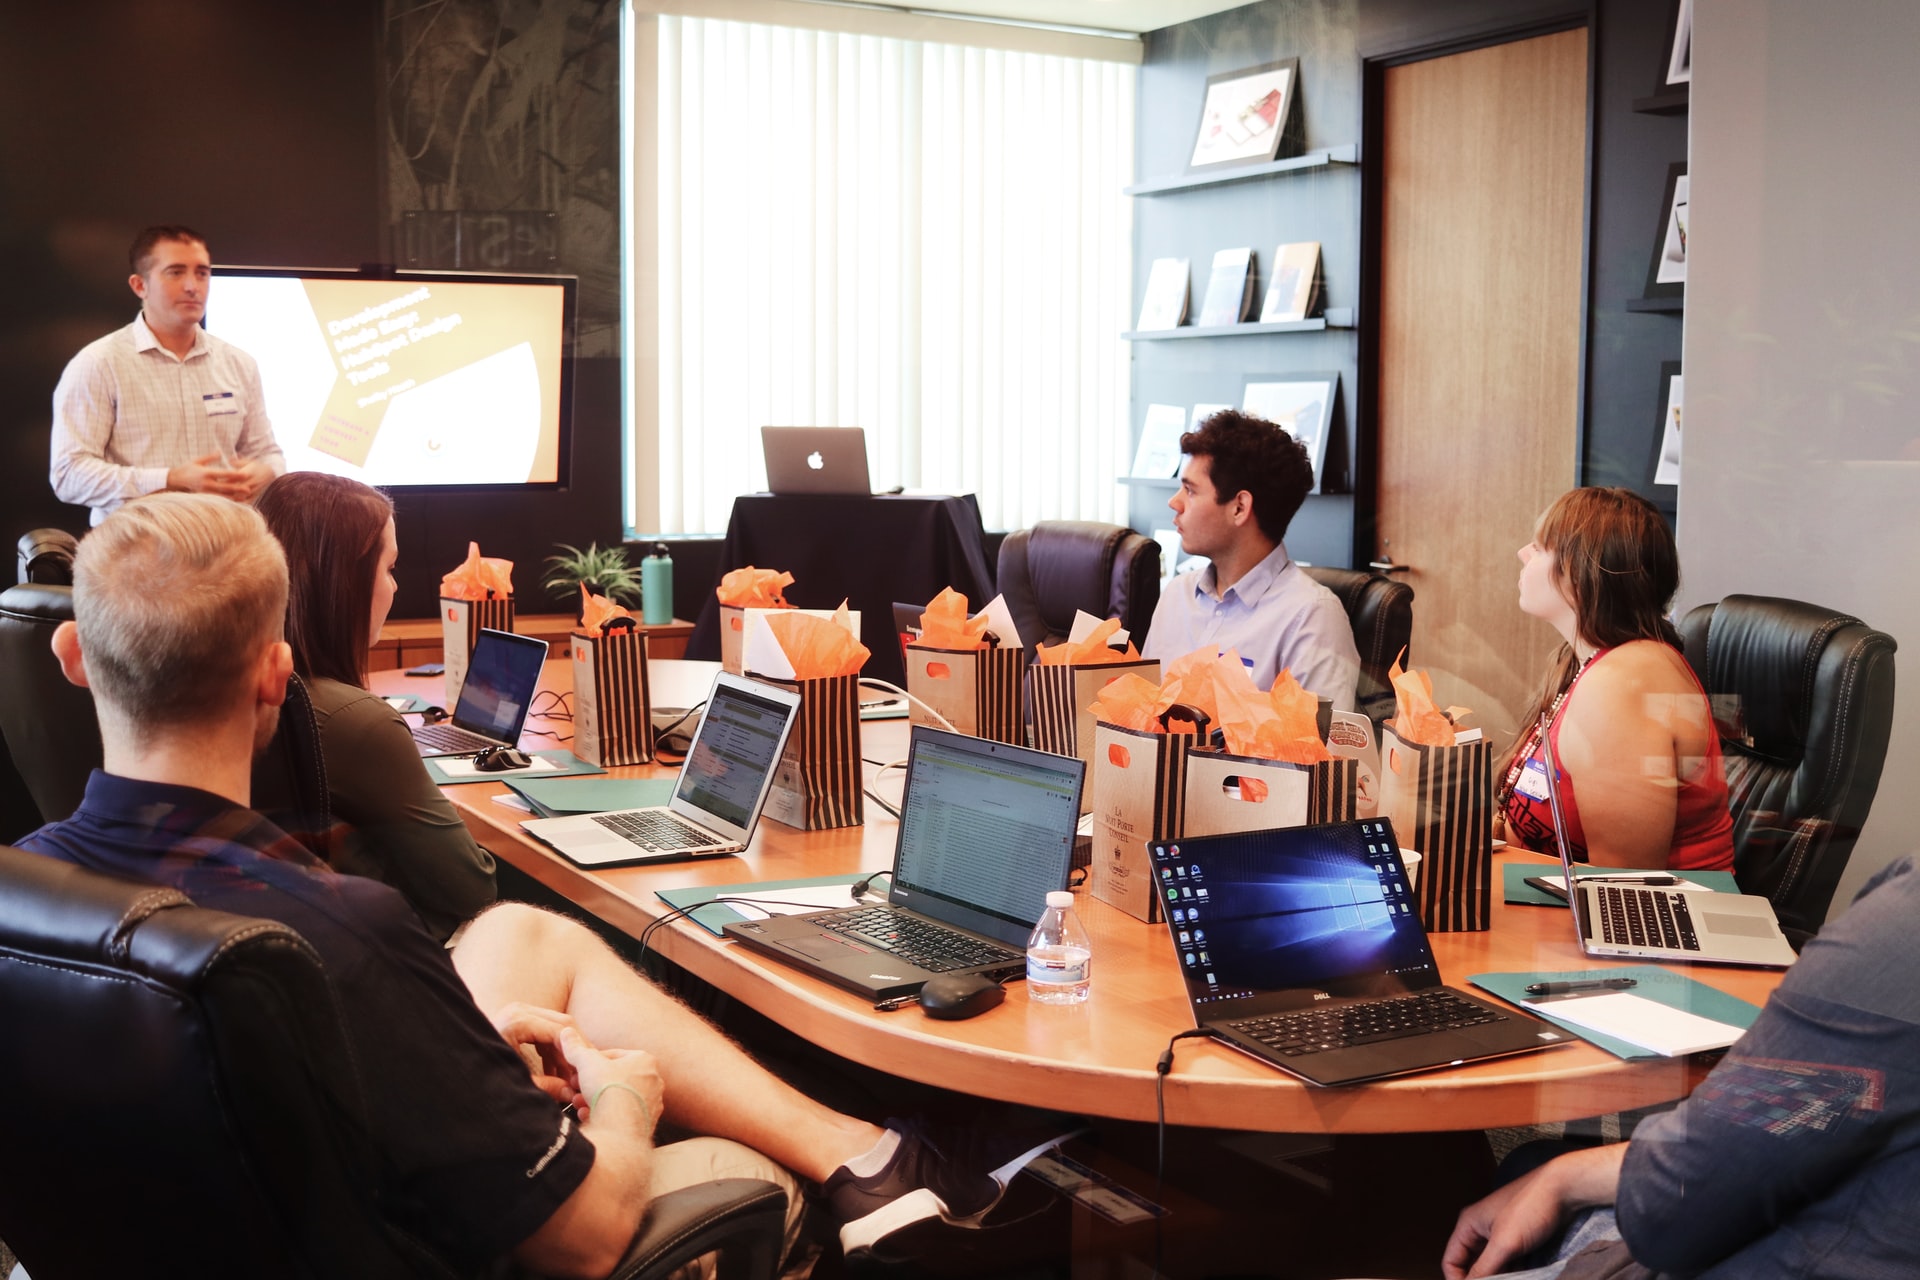 A team at an office discussing technology expense management software during a meeting